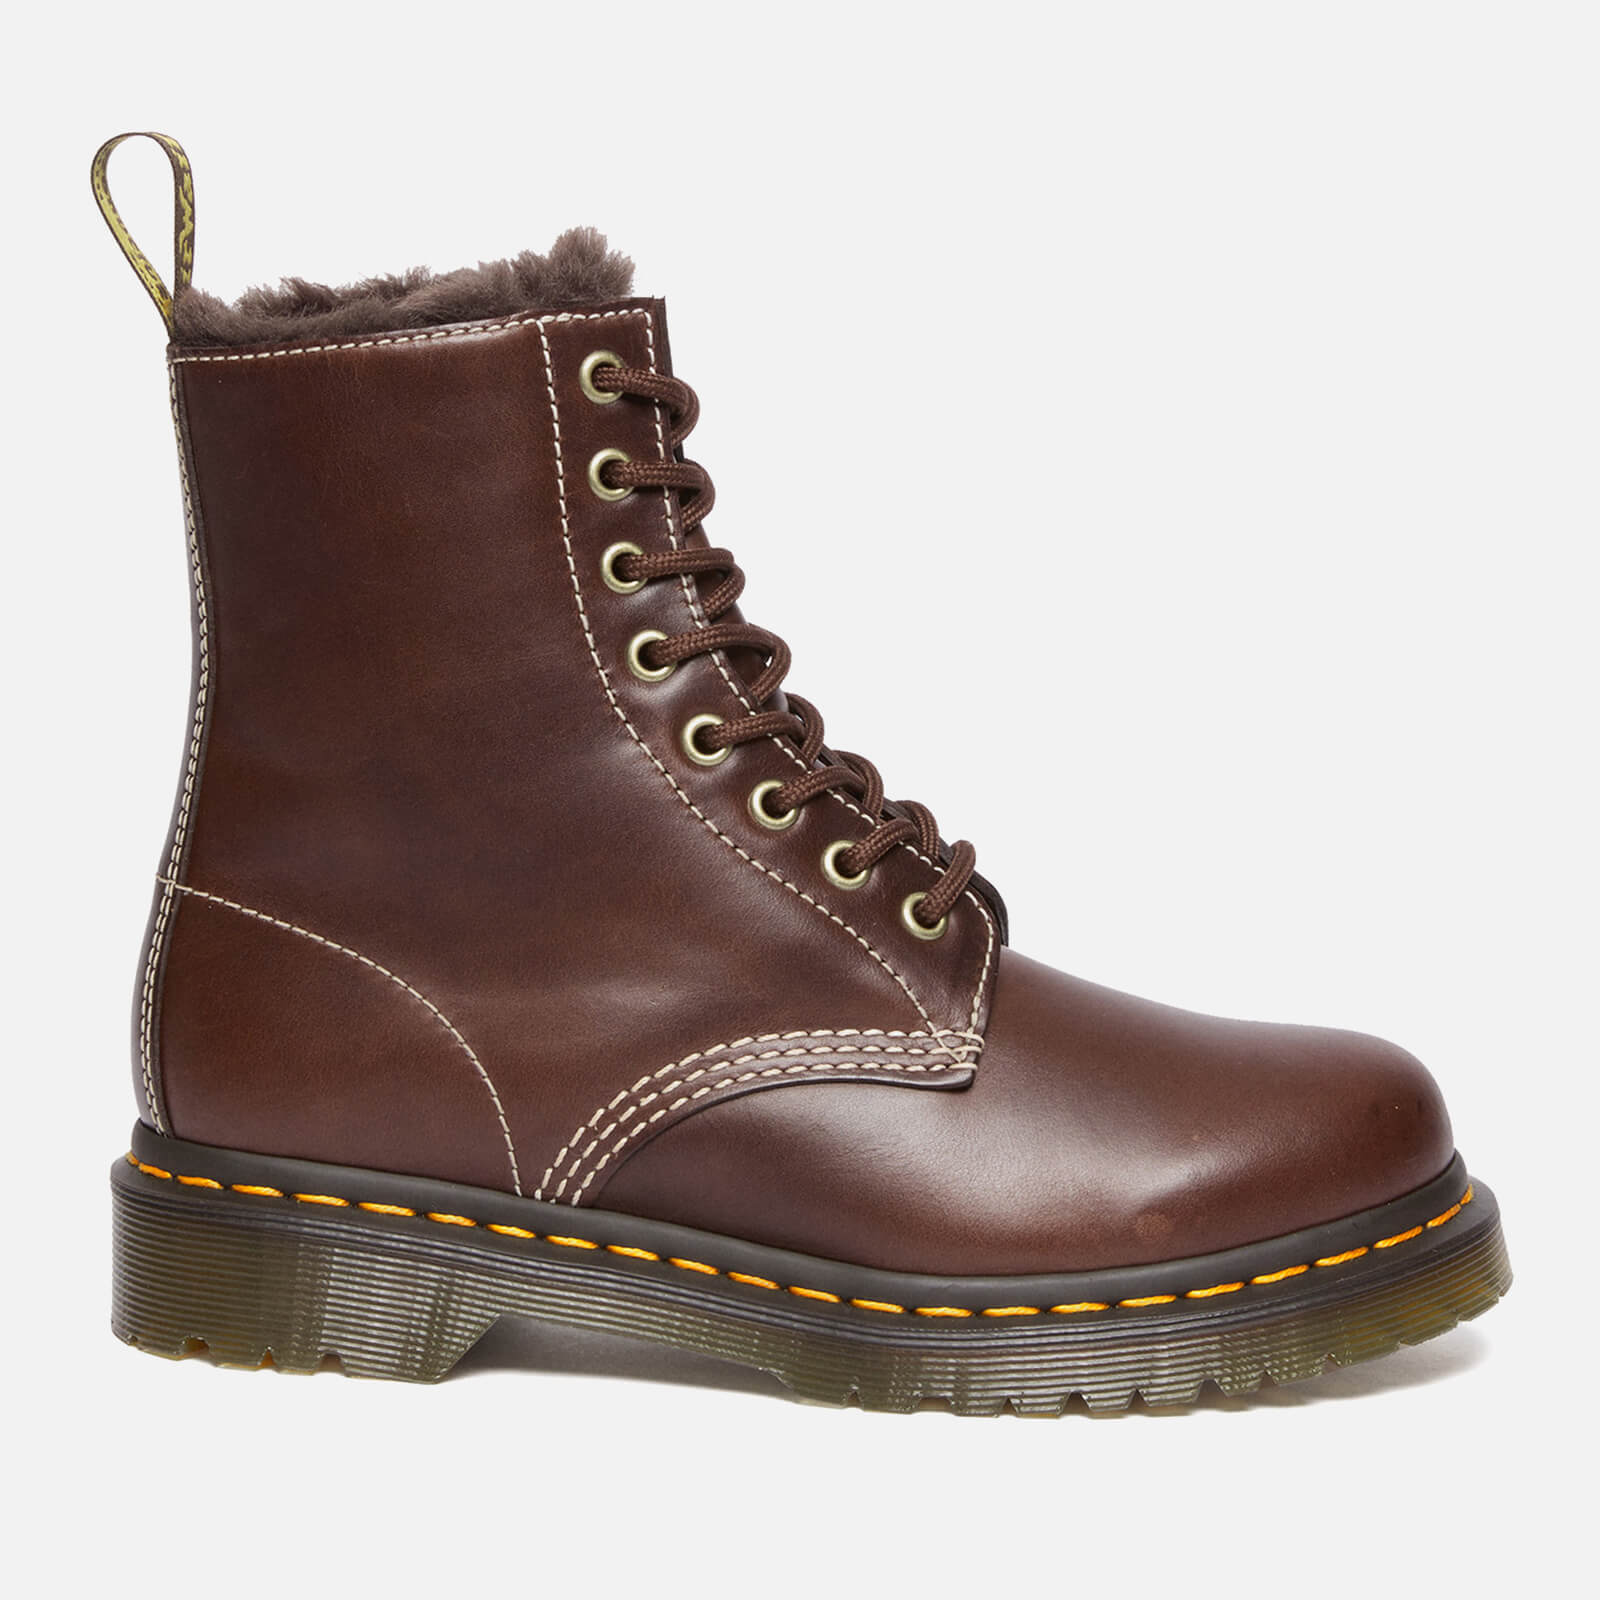 Dr. Martens Women’s 1460 Serena Leather 8-Eye Boots